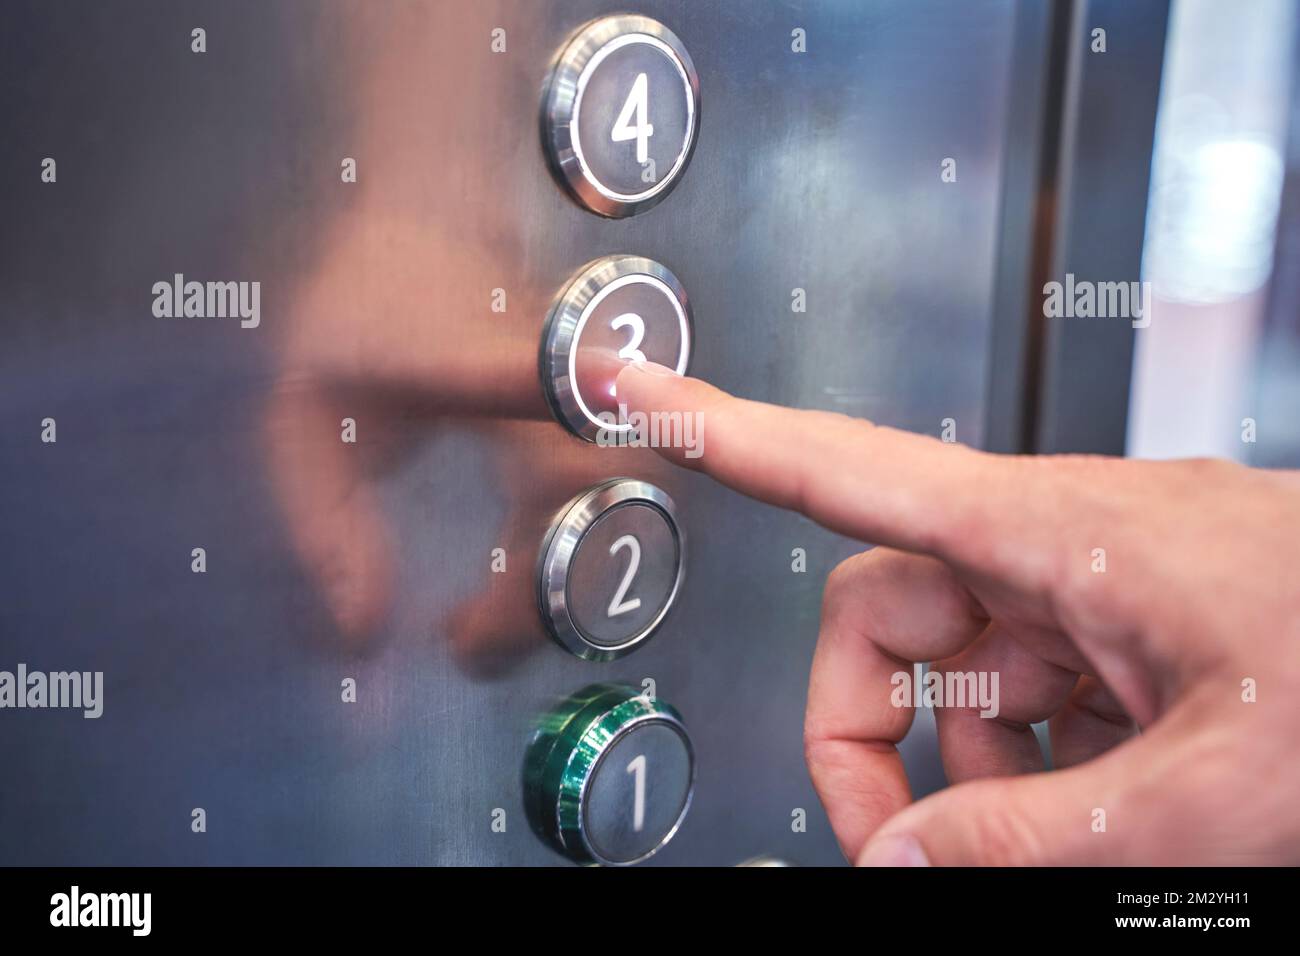 Man hand pointing number 3 button in elevator. Steel interior panel. Change year concept. Waiting new step. Up action. Start claustrophobia moment. Moving click Stock Photo